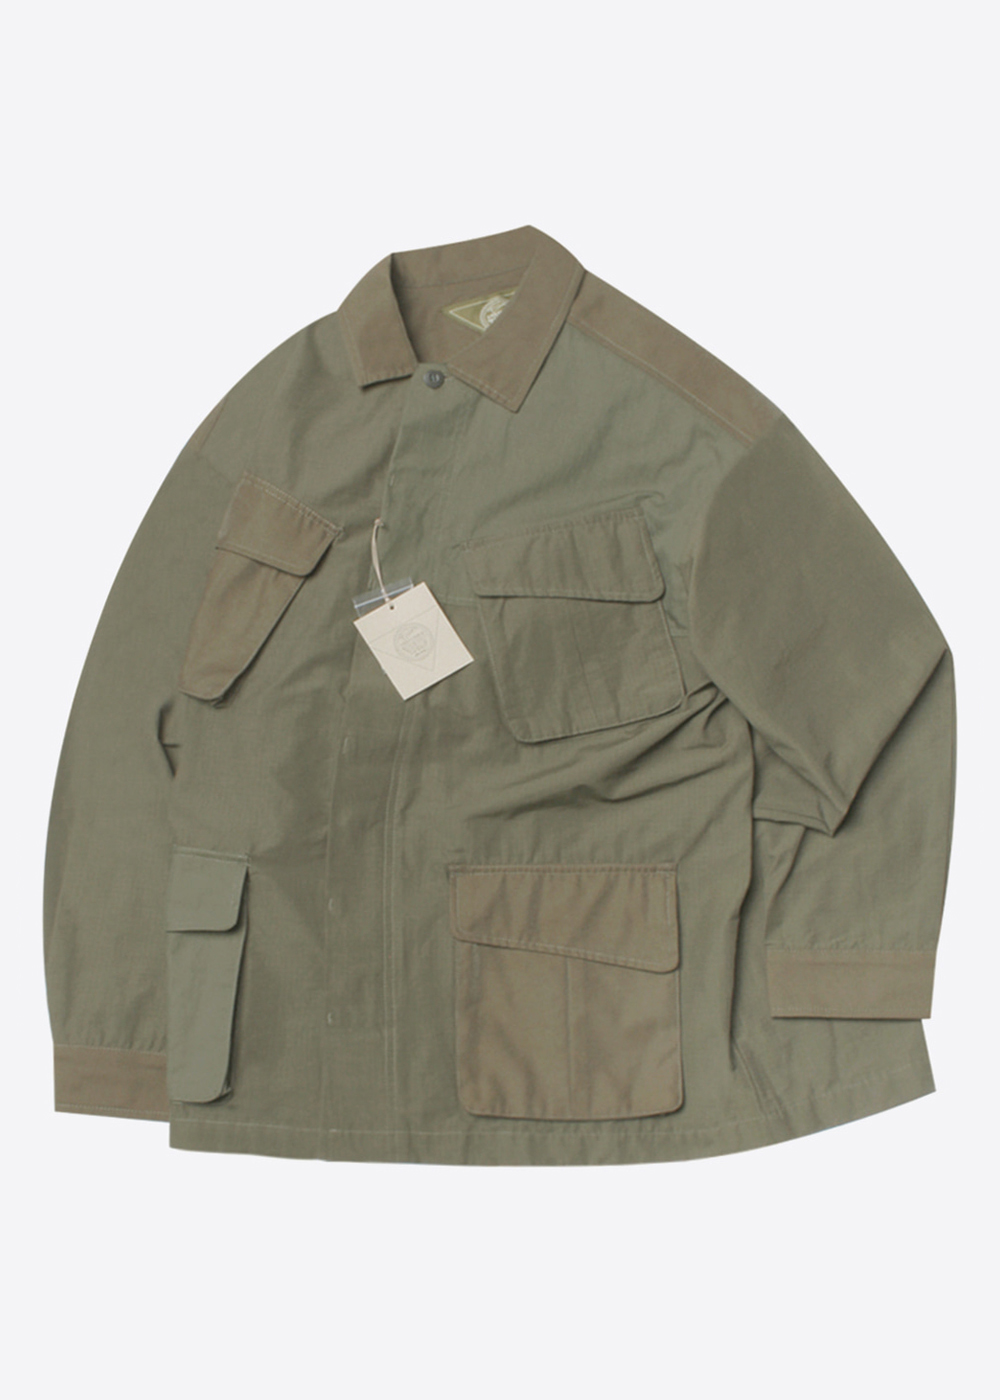 UNSTUIDIED BY NIKO AND’over fit’patchwork m-65 motive filed parka